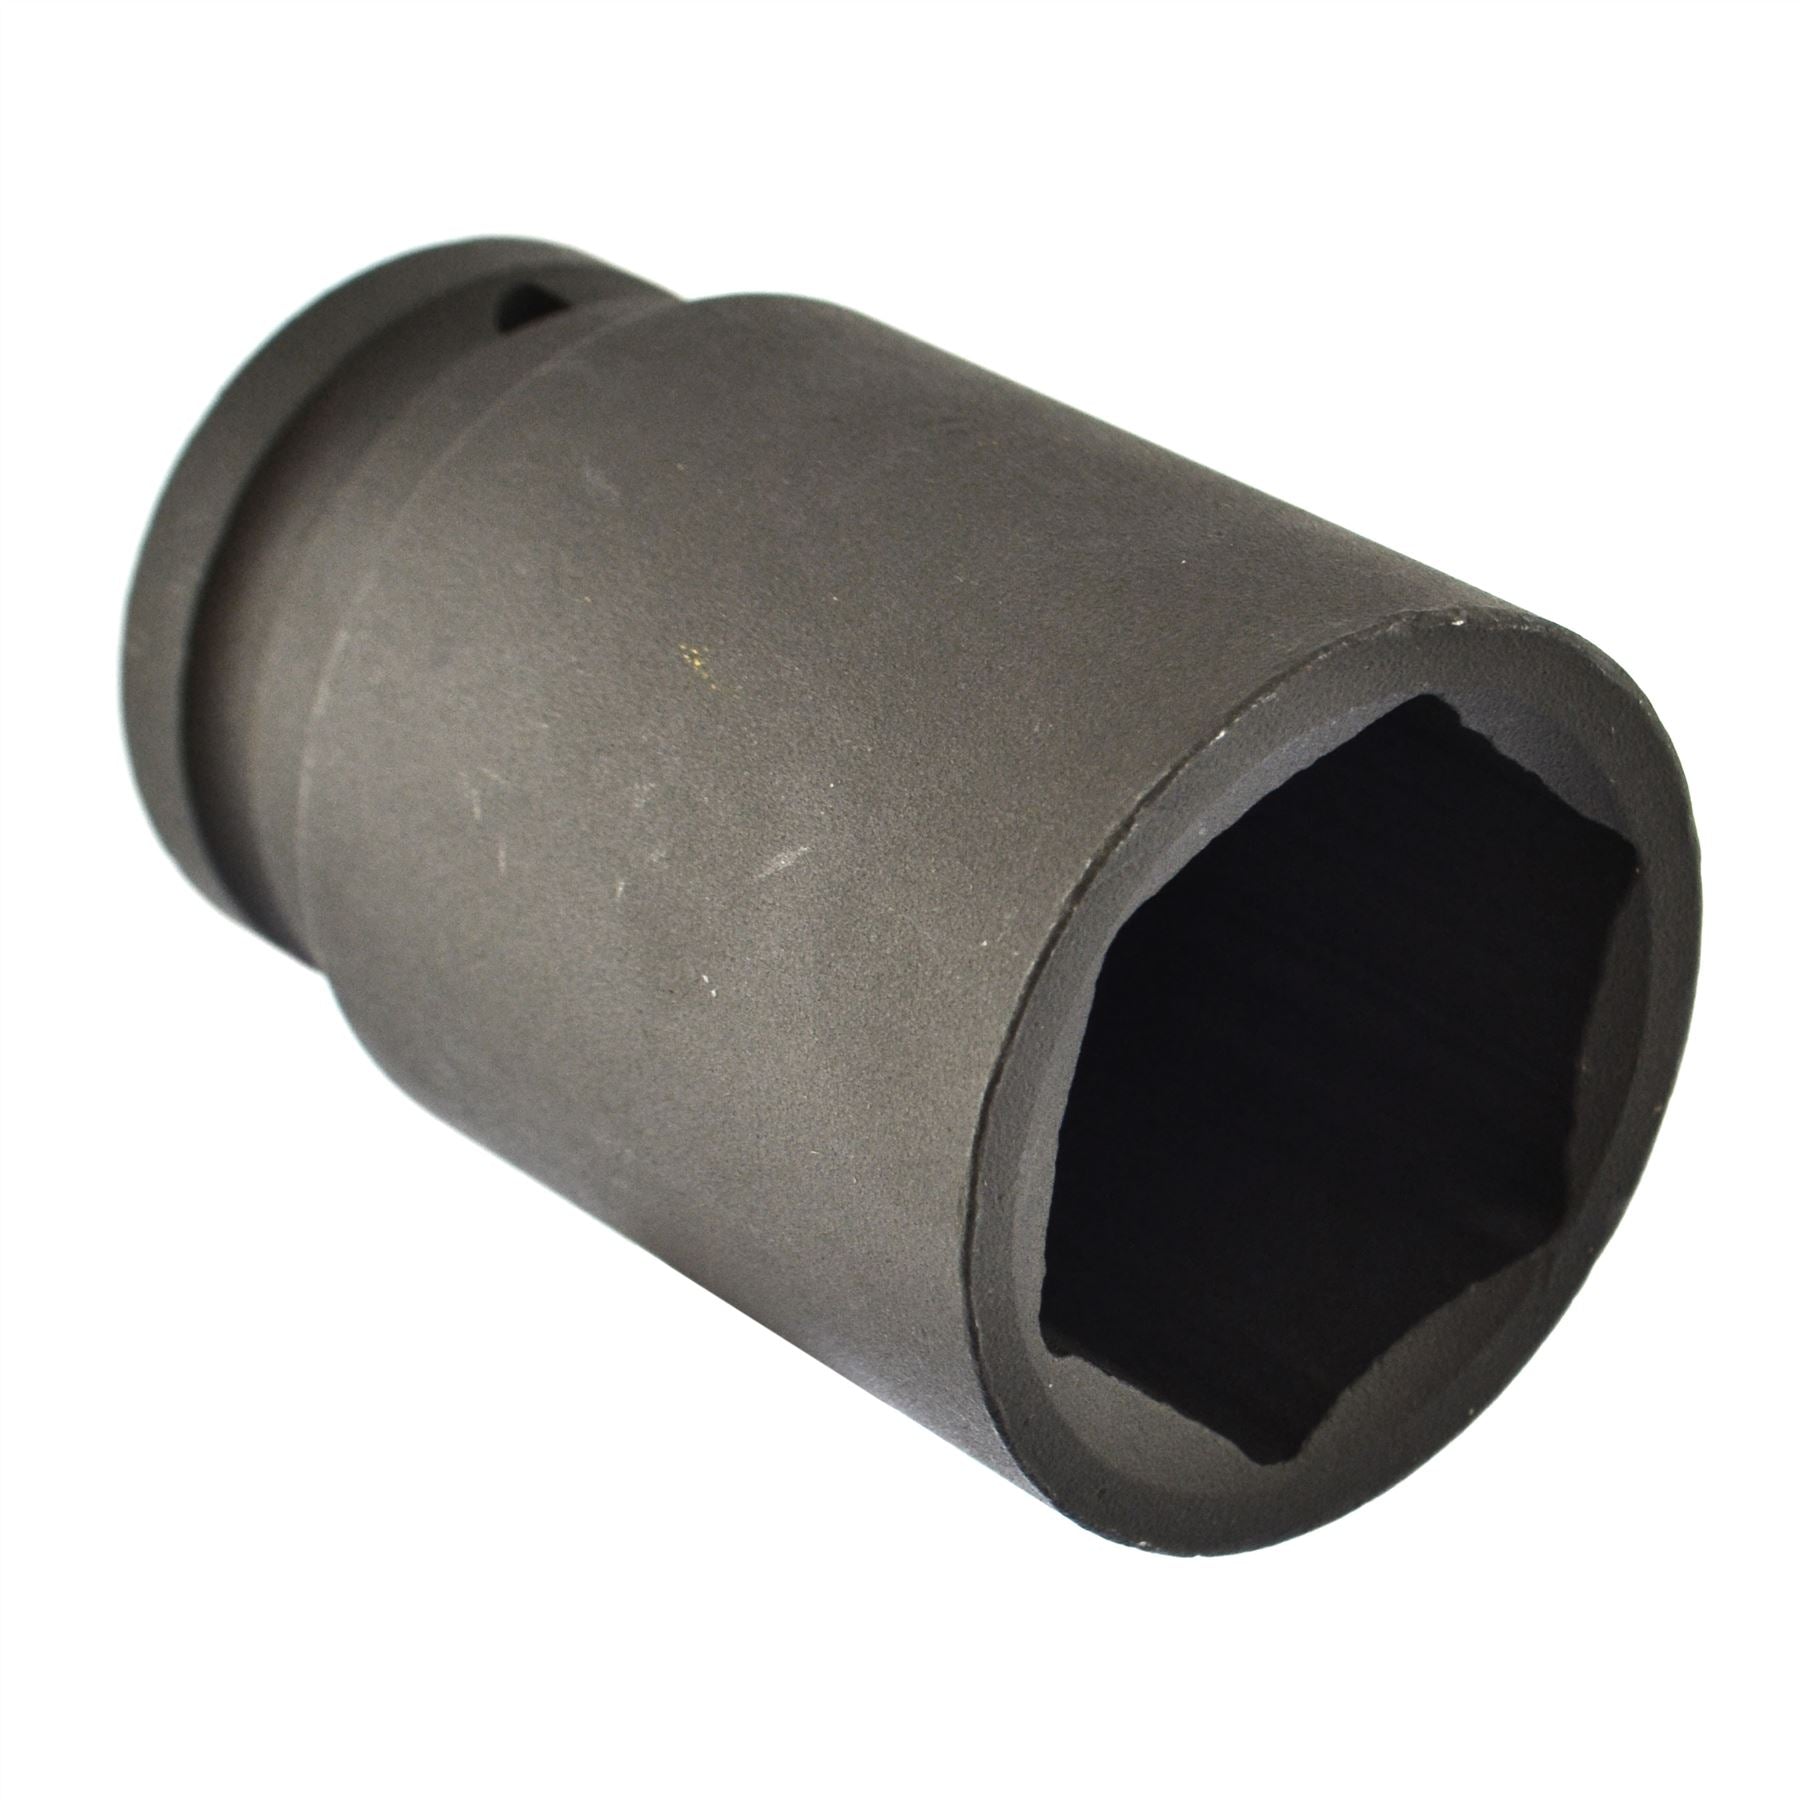 36mm Metric 3/4 Drive Double Deep Impact Socket 6 Sided Single Hex Thick Walled